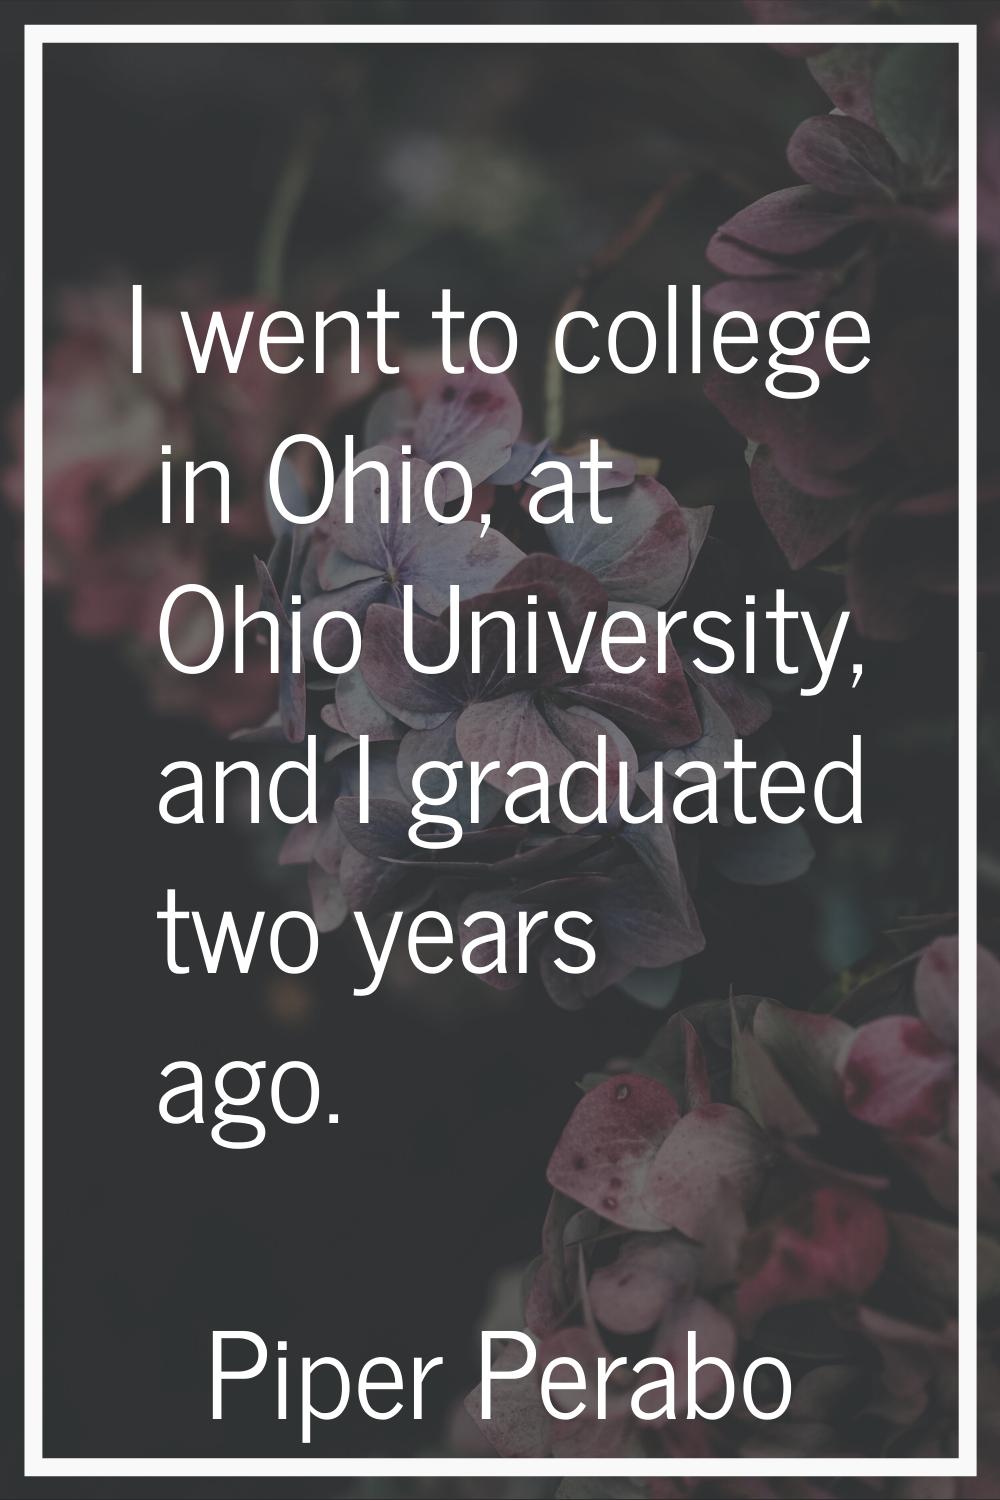 I went to college in Ohio, at Ohio University, and I graduated two years ago.